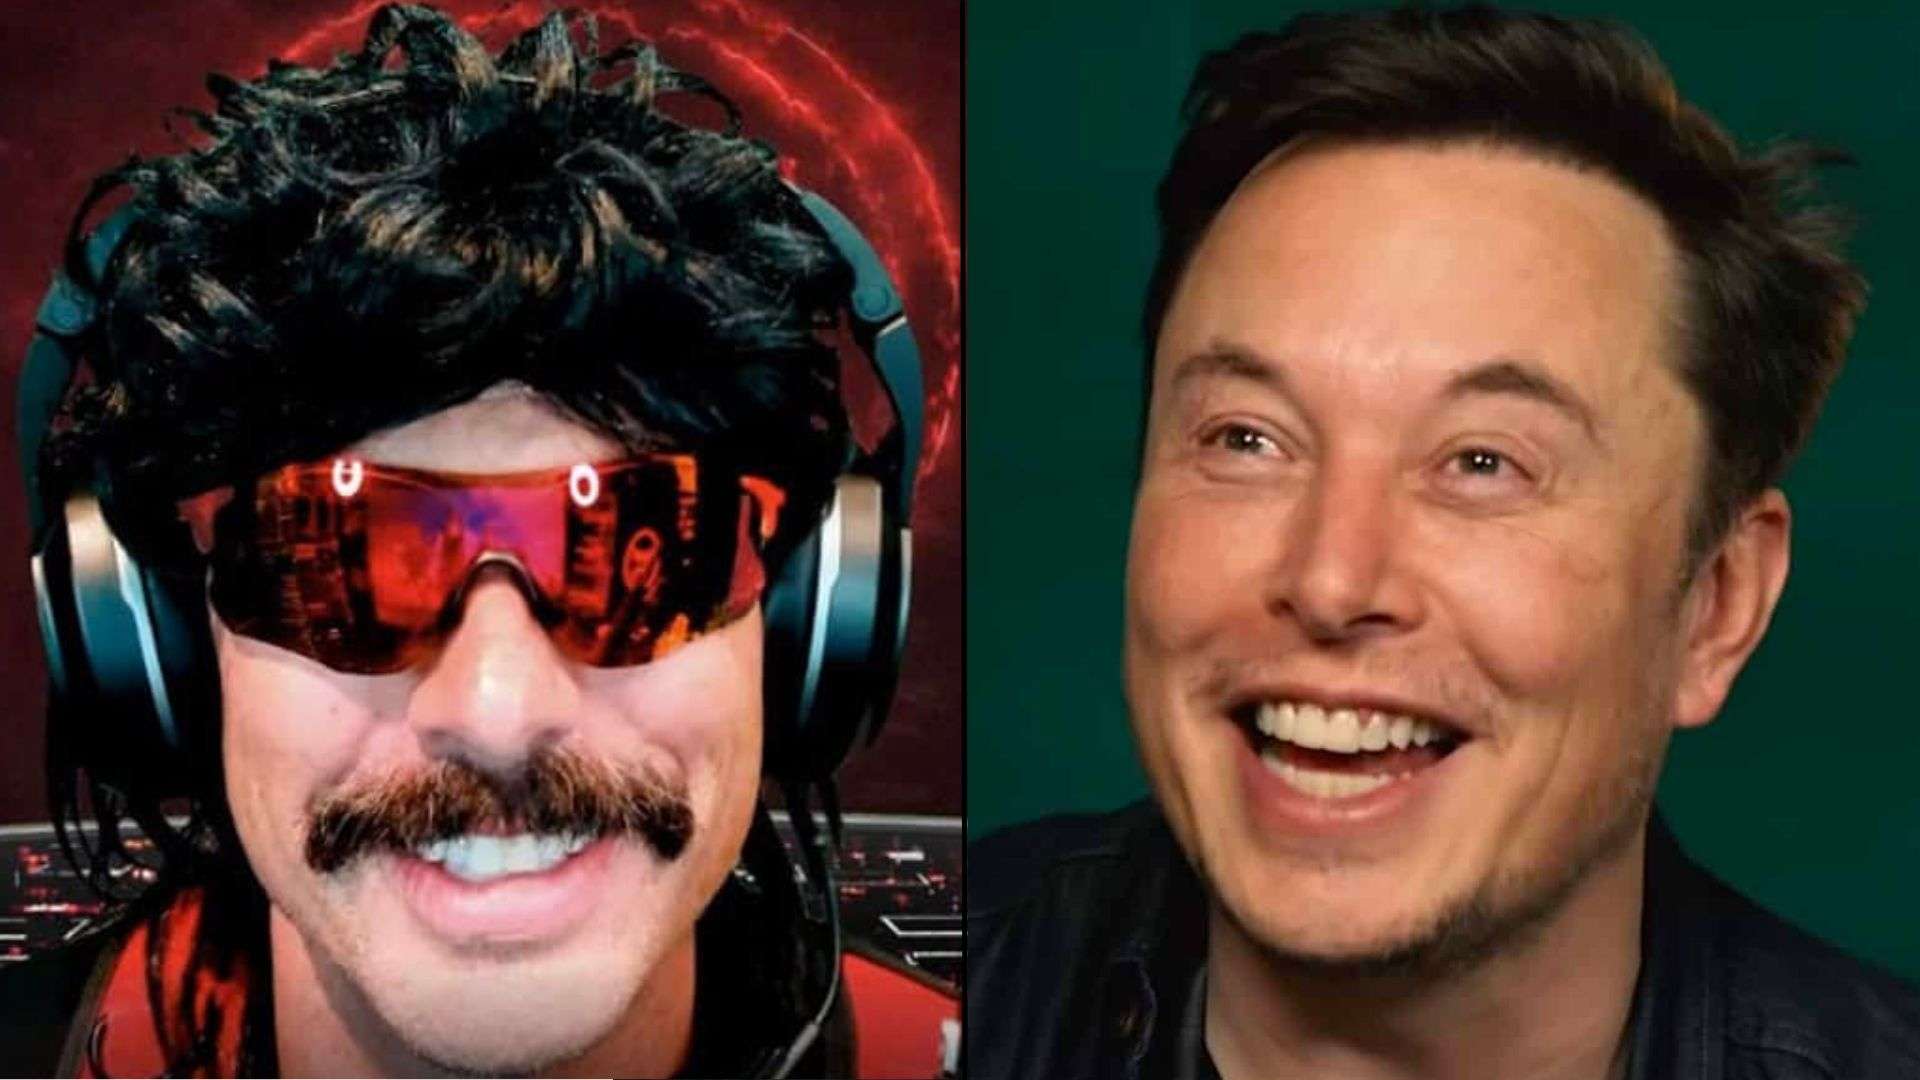 Dr Disrespect and Elon Musk smiling at camera in front of red and green background